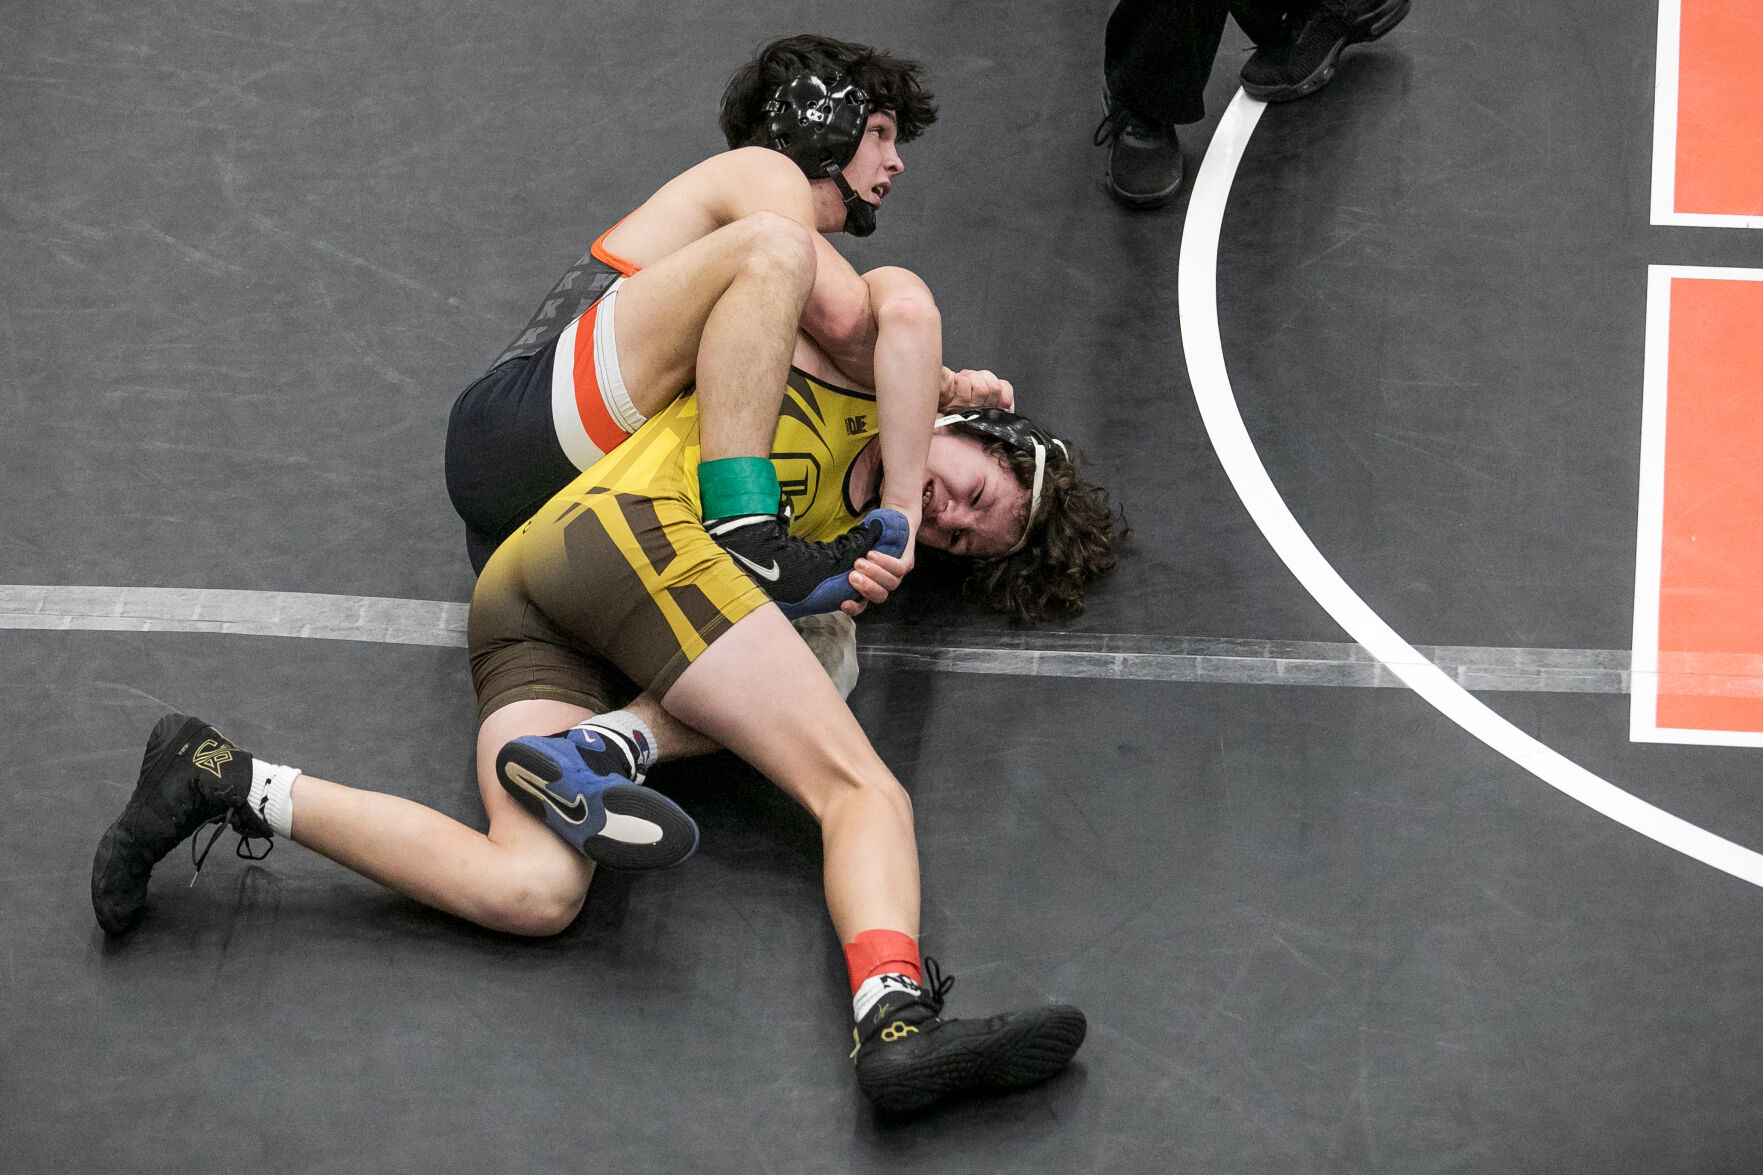 Kingsley Wrestlers Shine at Division 3 Regionals; Traverse City West and Central Wrestlers Qualify for State Finals